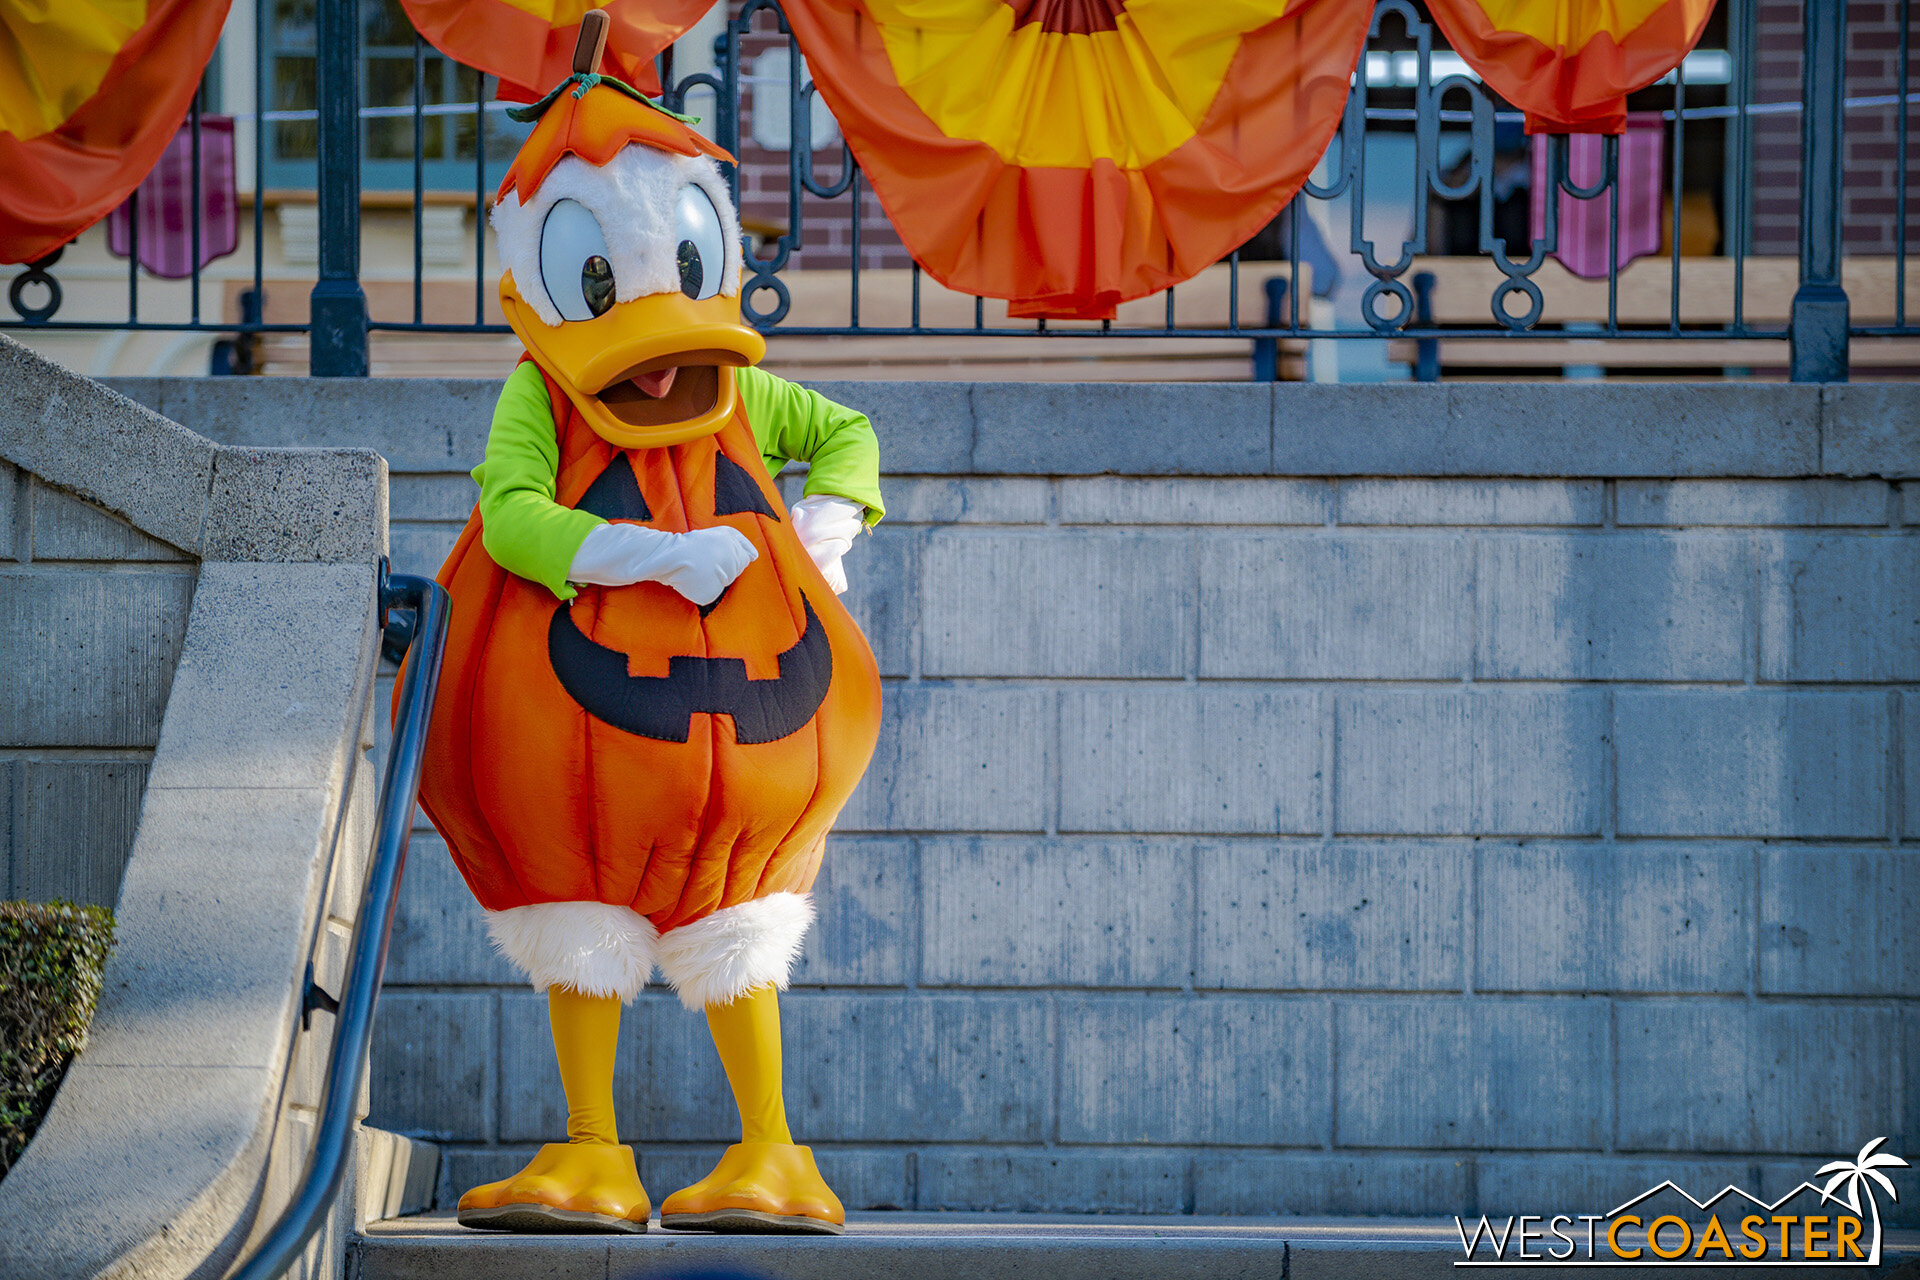  The spacing and elevated position of the characters allows guests to get their picture at street level with the characters in the frame, or to get photos of the characters only. 